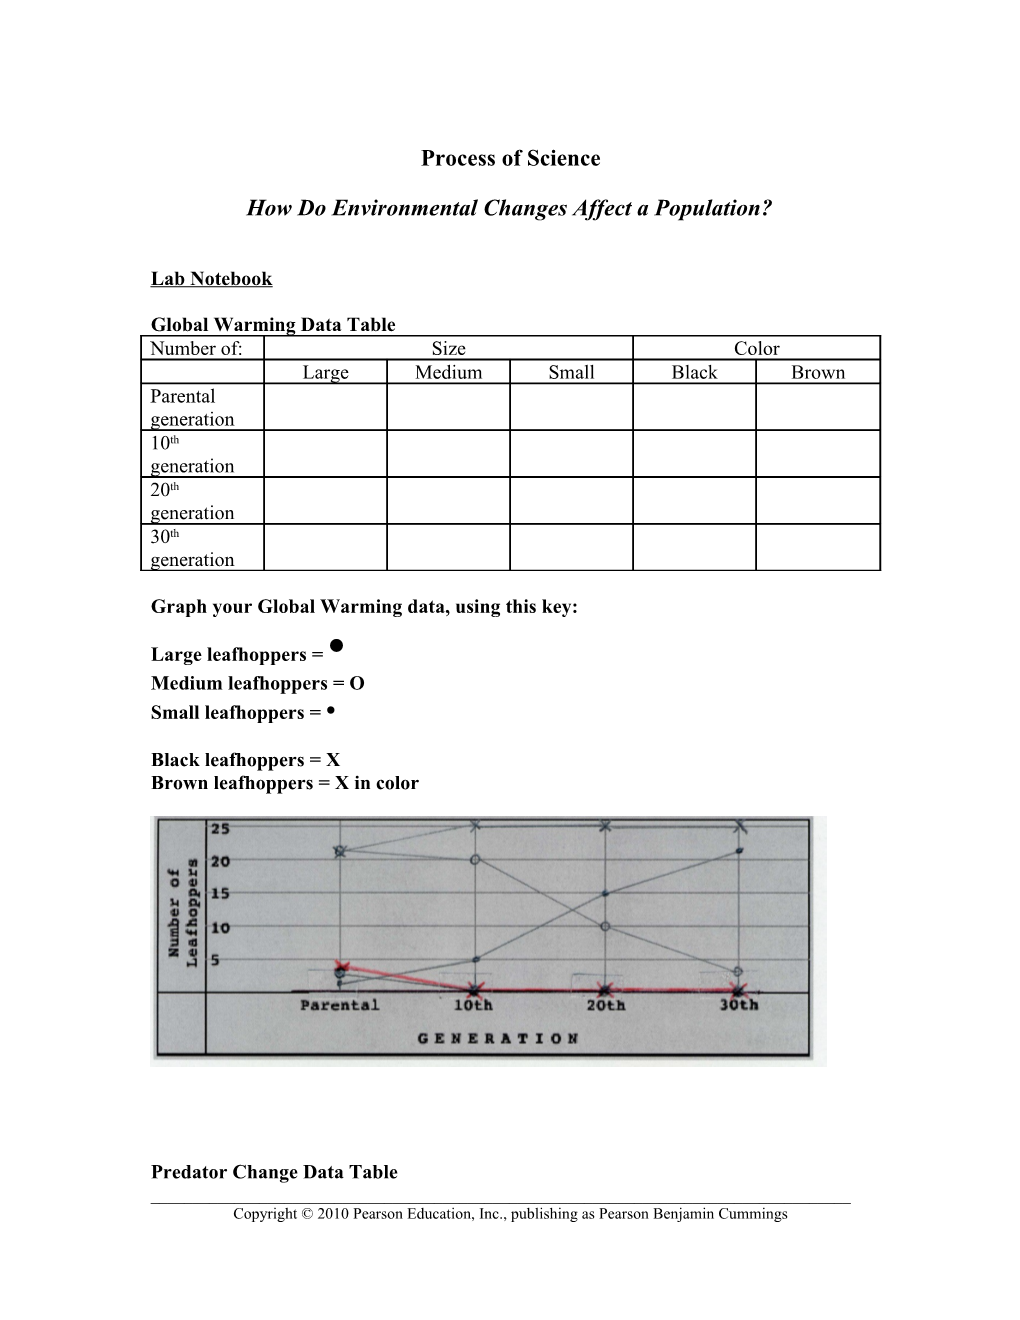 How Do Environmental Changes Affect a Population?